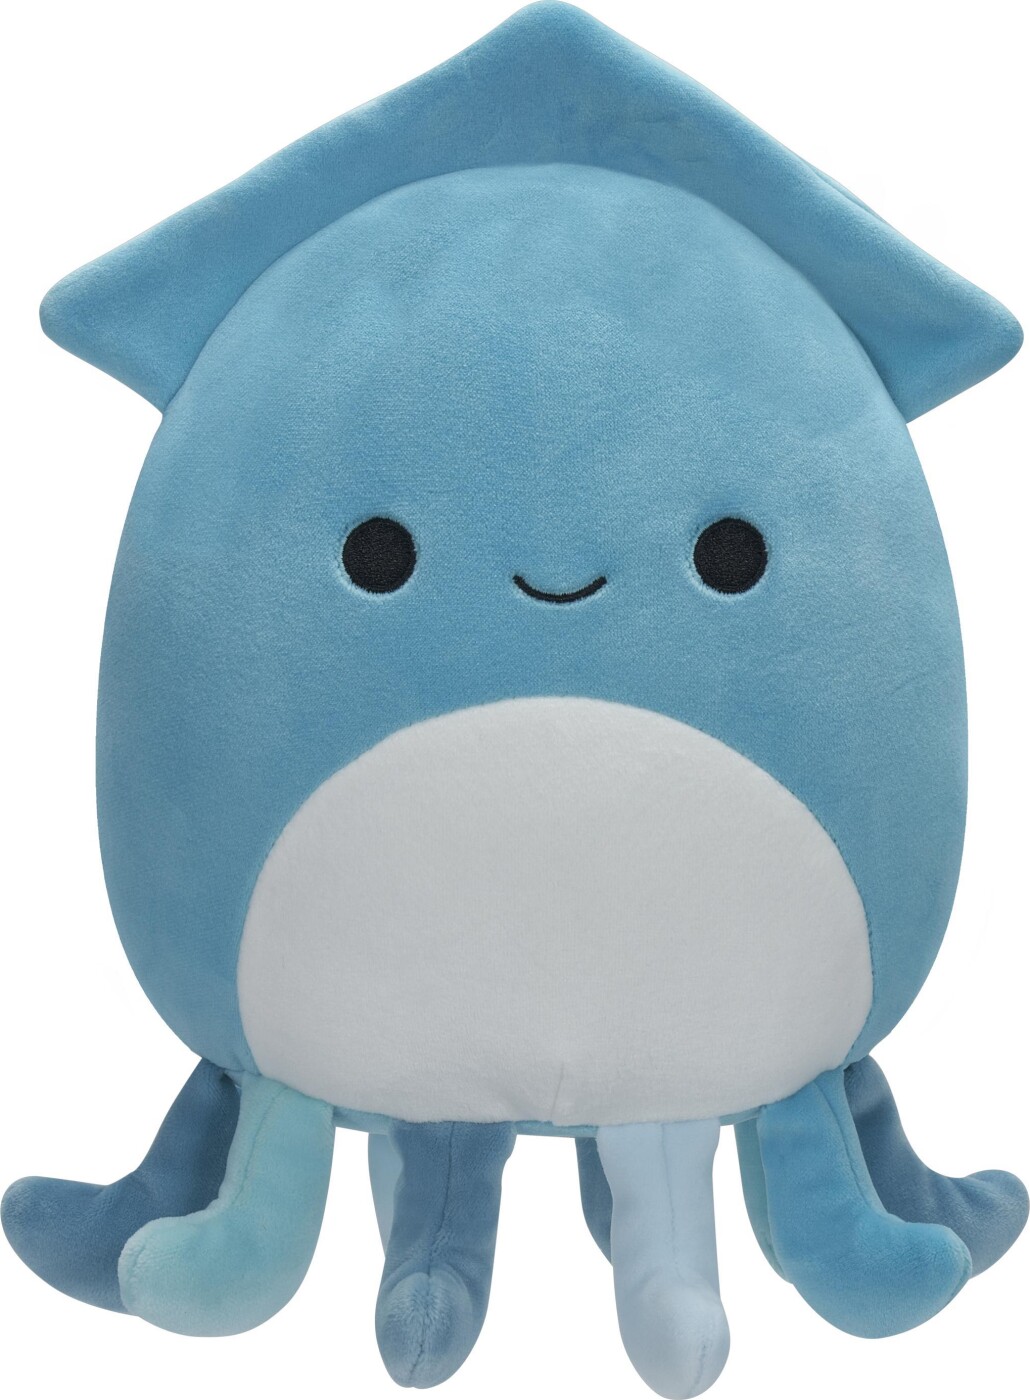 https://content.gucca.dk/covers/big/s/q/squishmallows-19-cm-plush-p14-sky-the-teal-squid_606503.jpg?mod=1687303376